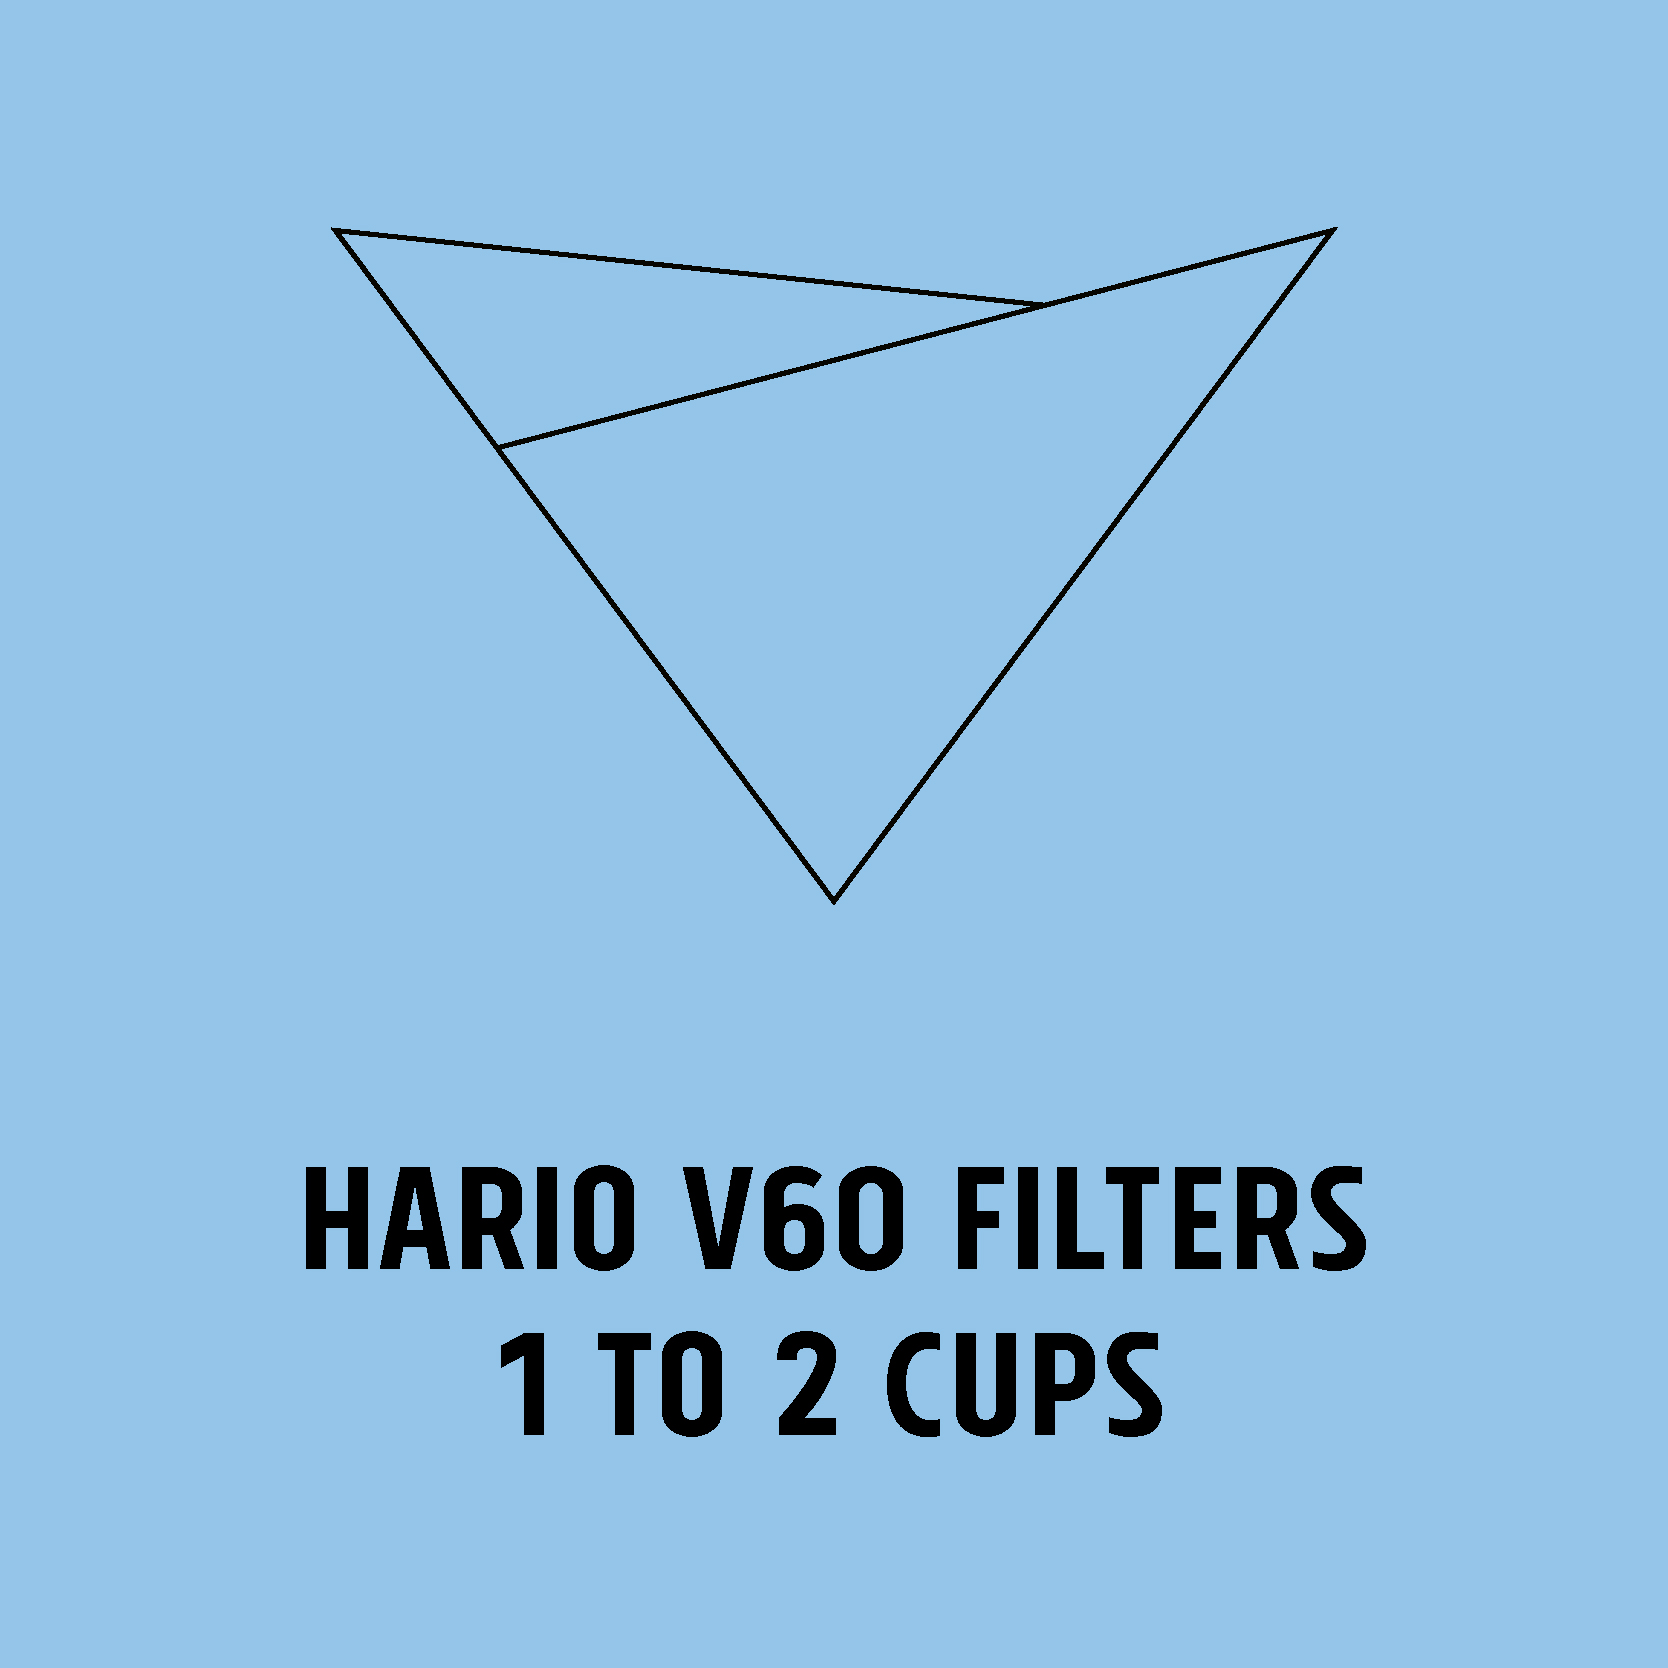 Hario V60 Filters - 1 to 2 cups